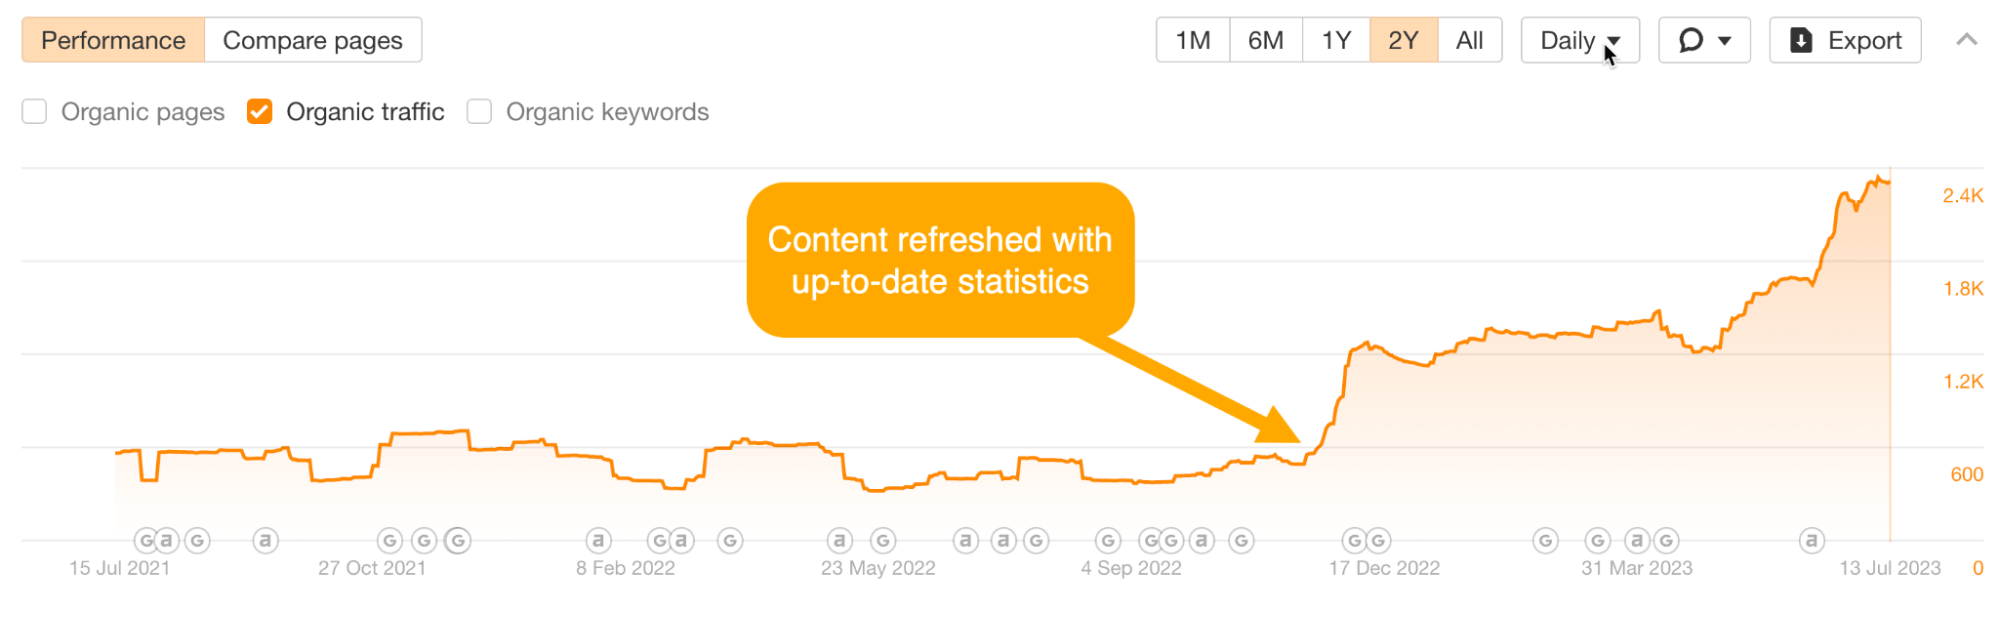 Traffic graph showing sustained increase in traffic following a content refresh
